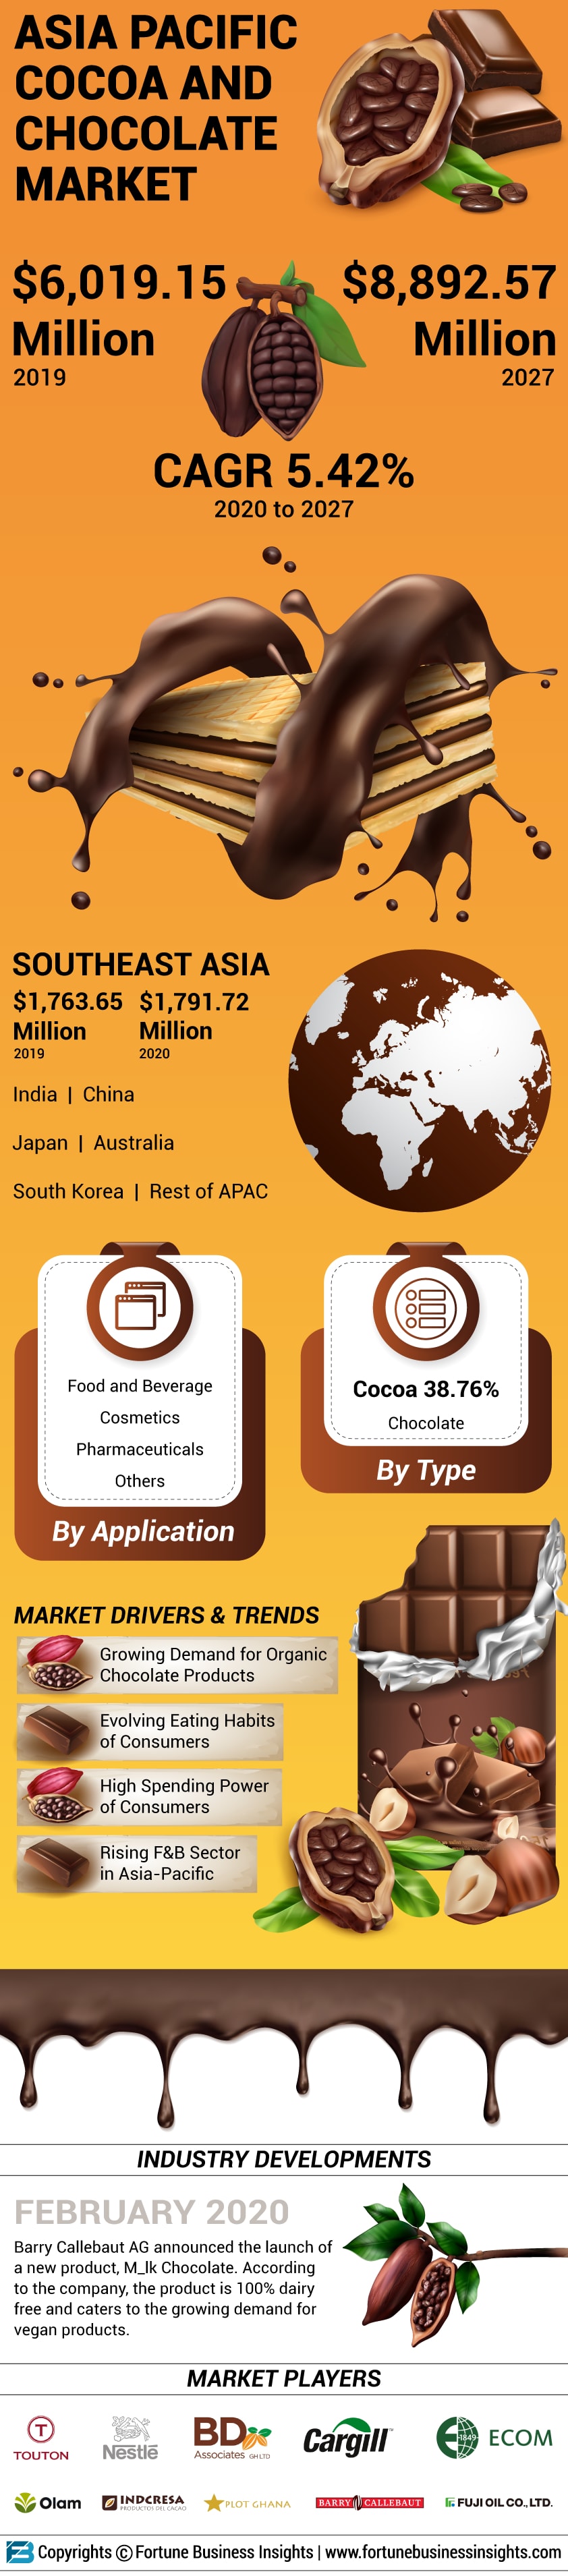 Asia Pacific Cocoa and Chocolate Market